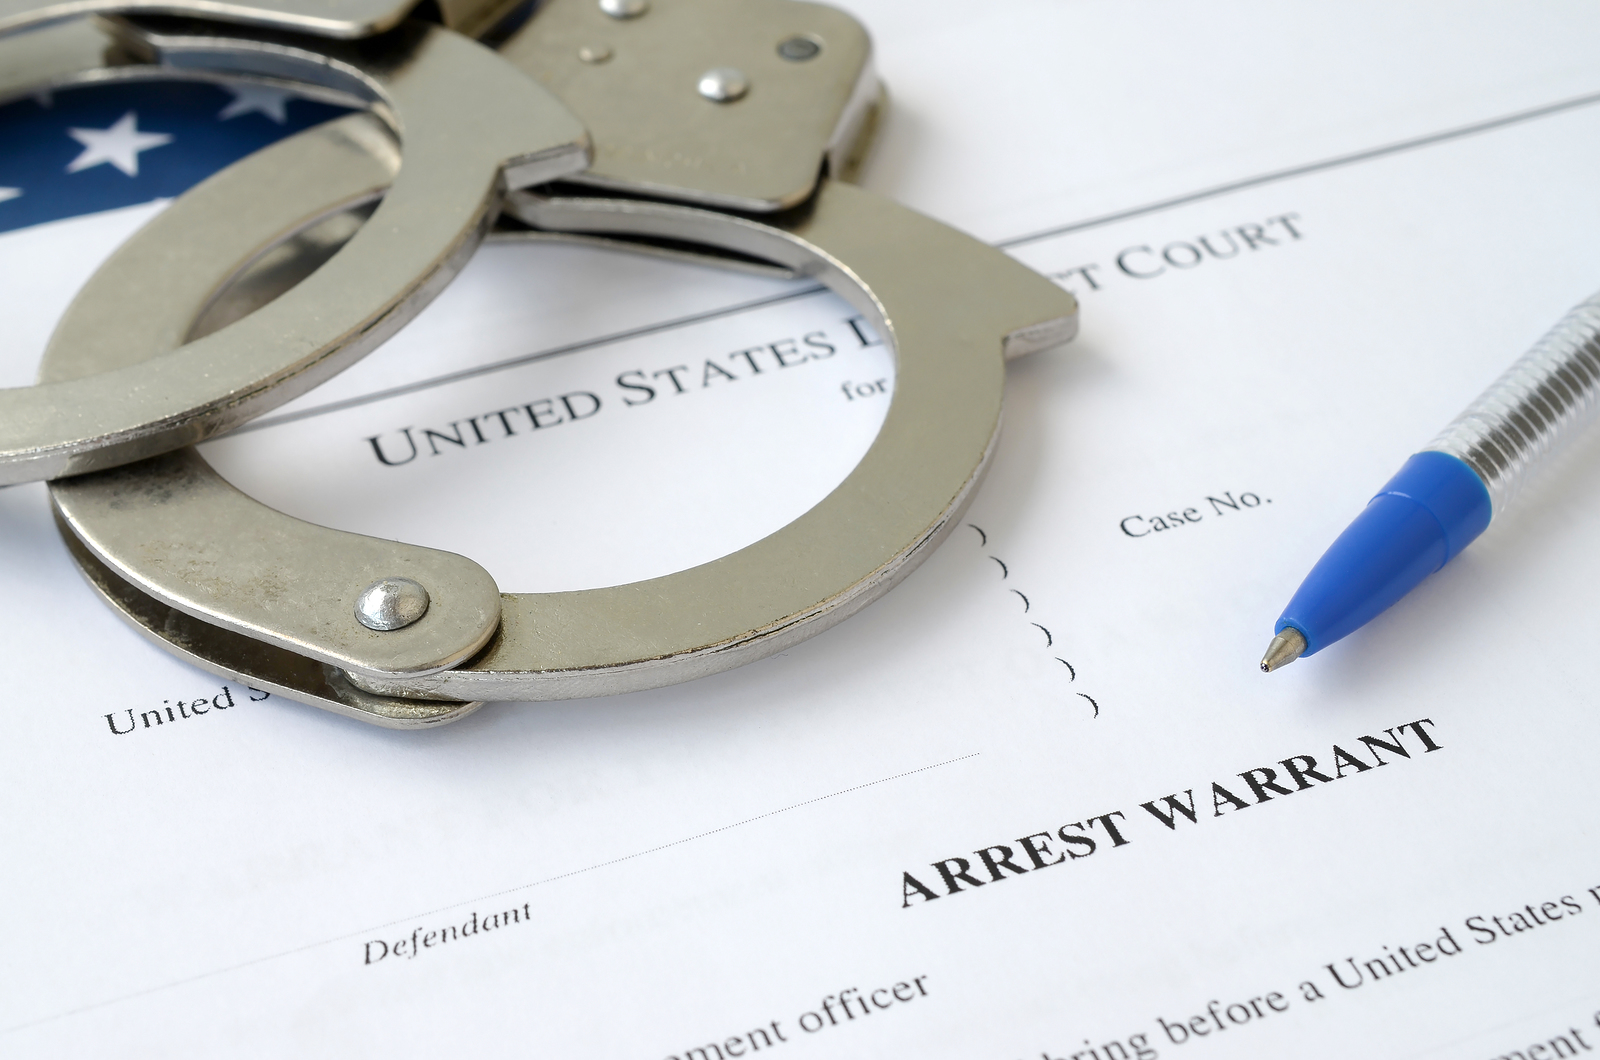 How To Clear Up A Felony Warrant Without Going To Jail